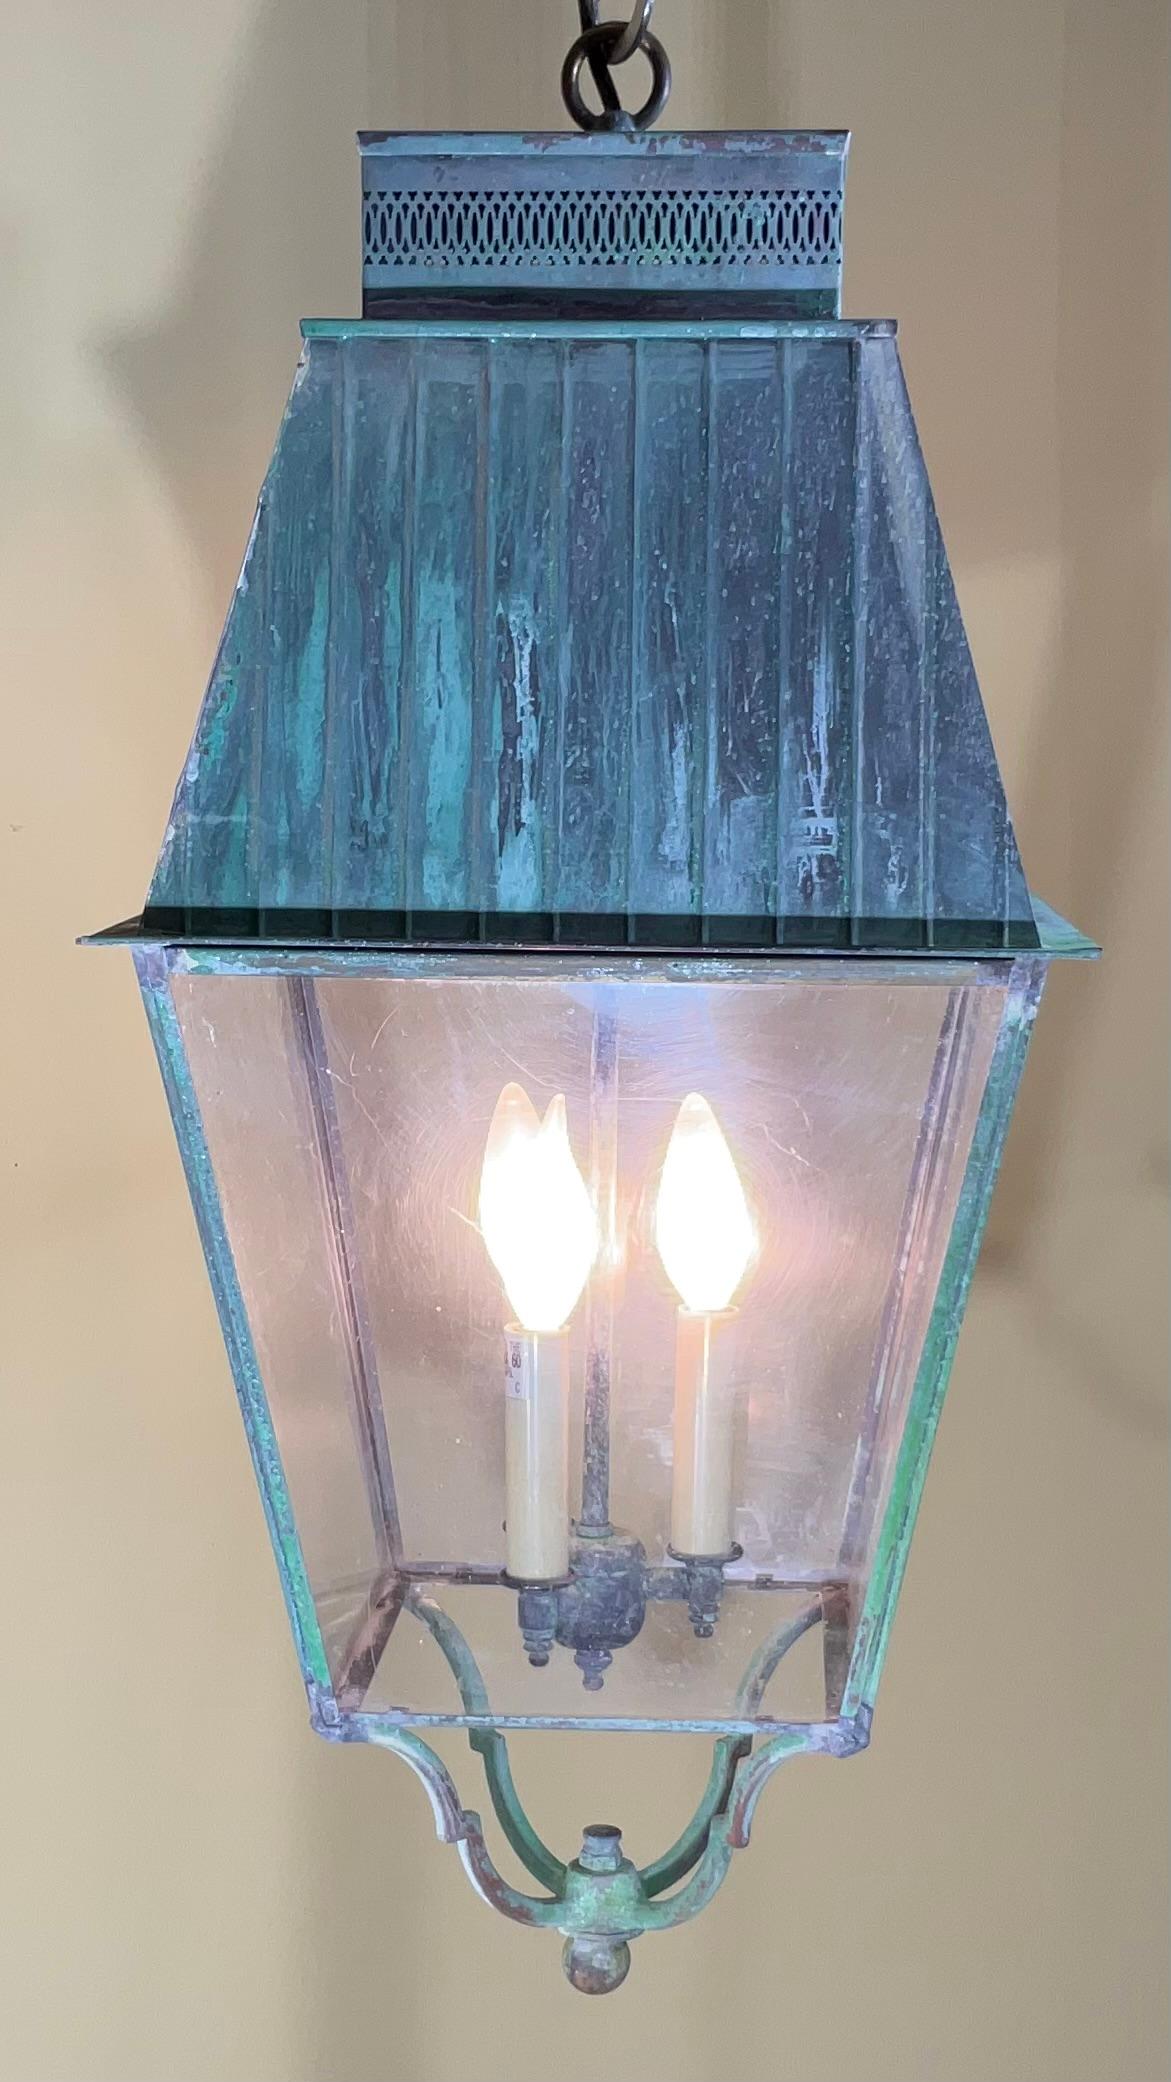 Hand-Crafted  Vintage Square Hanging Lantern For Sale